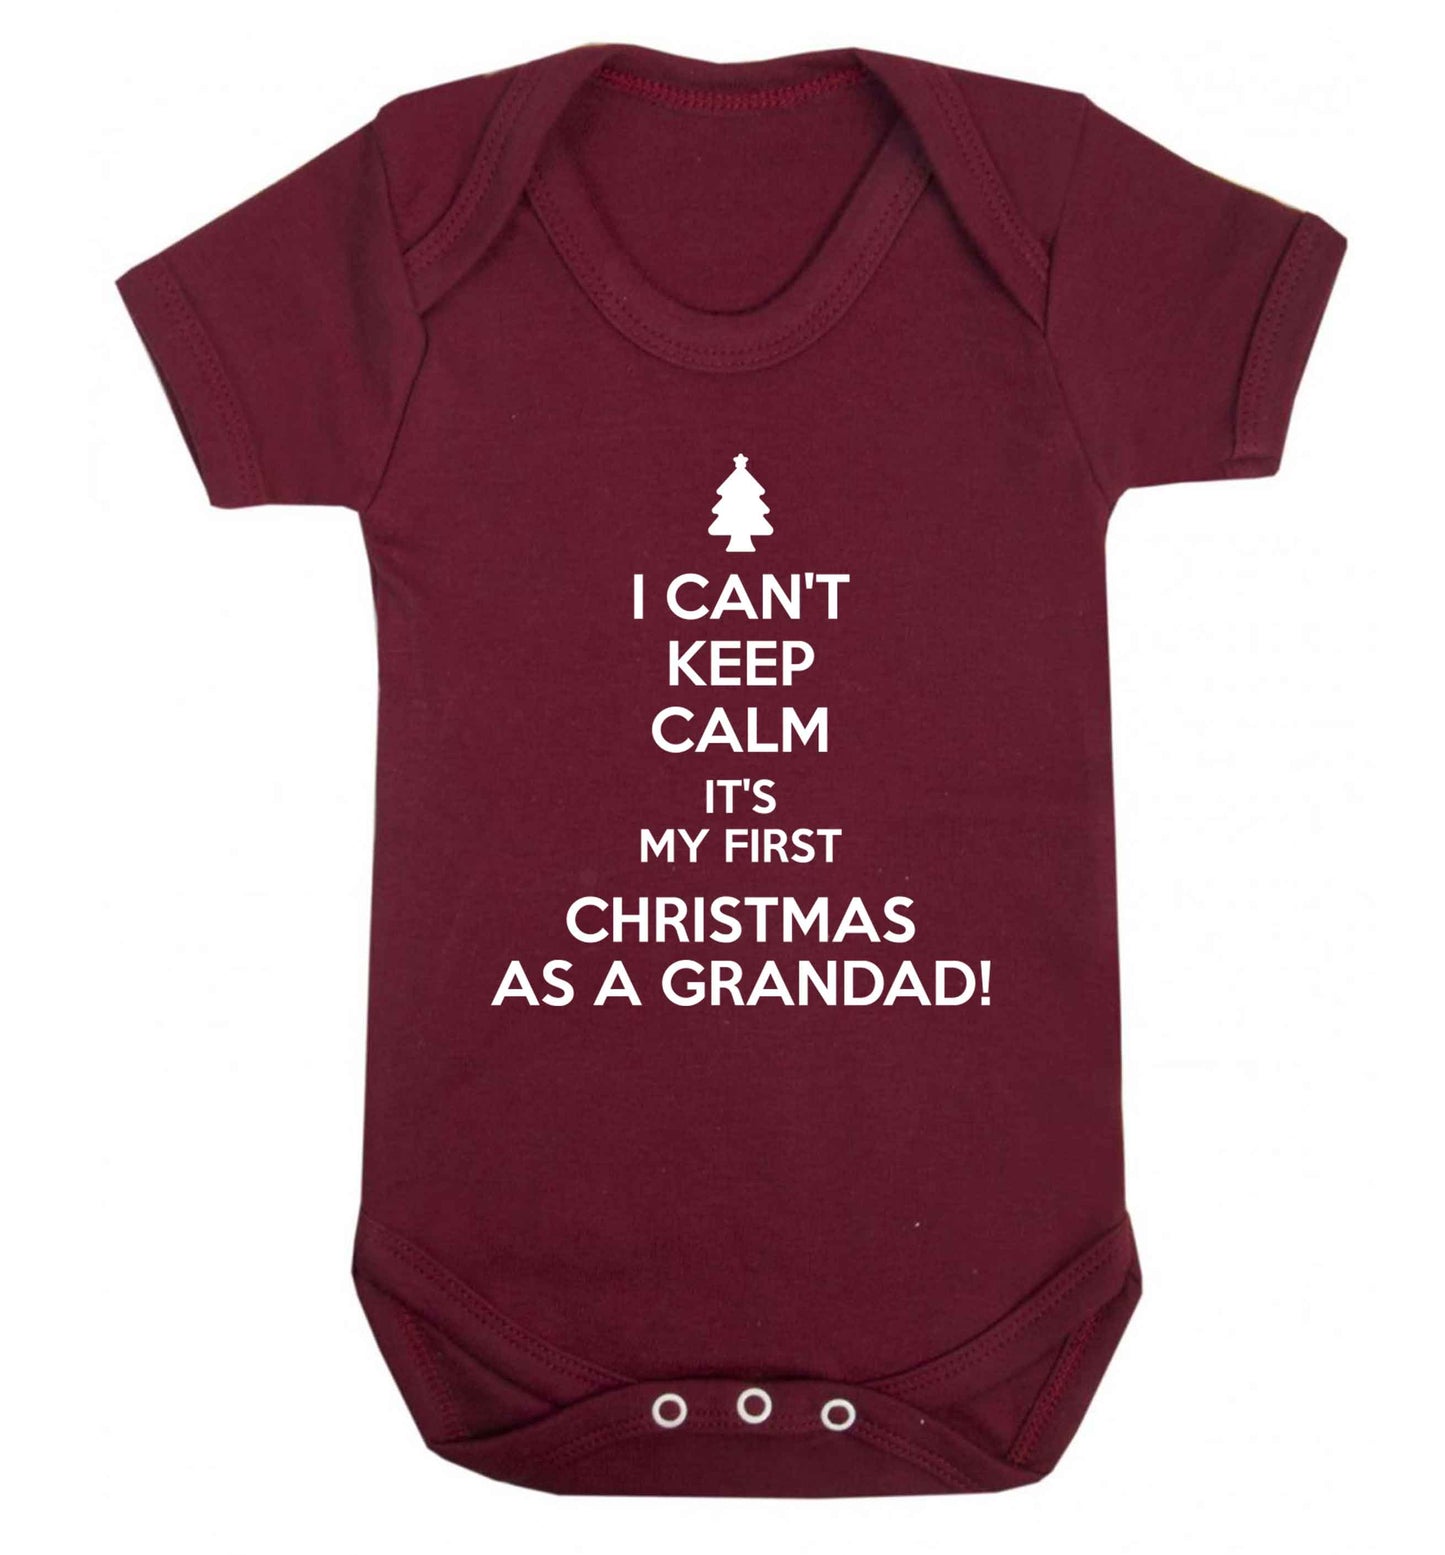 I can't keep calm it's my first Christmas as a grandad! Baby Vest maroon 18-24 months